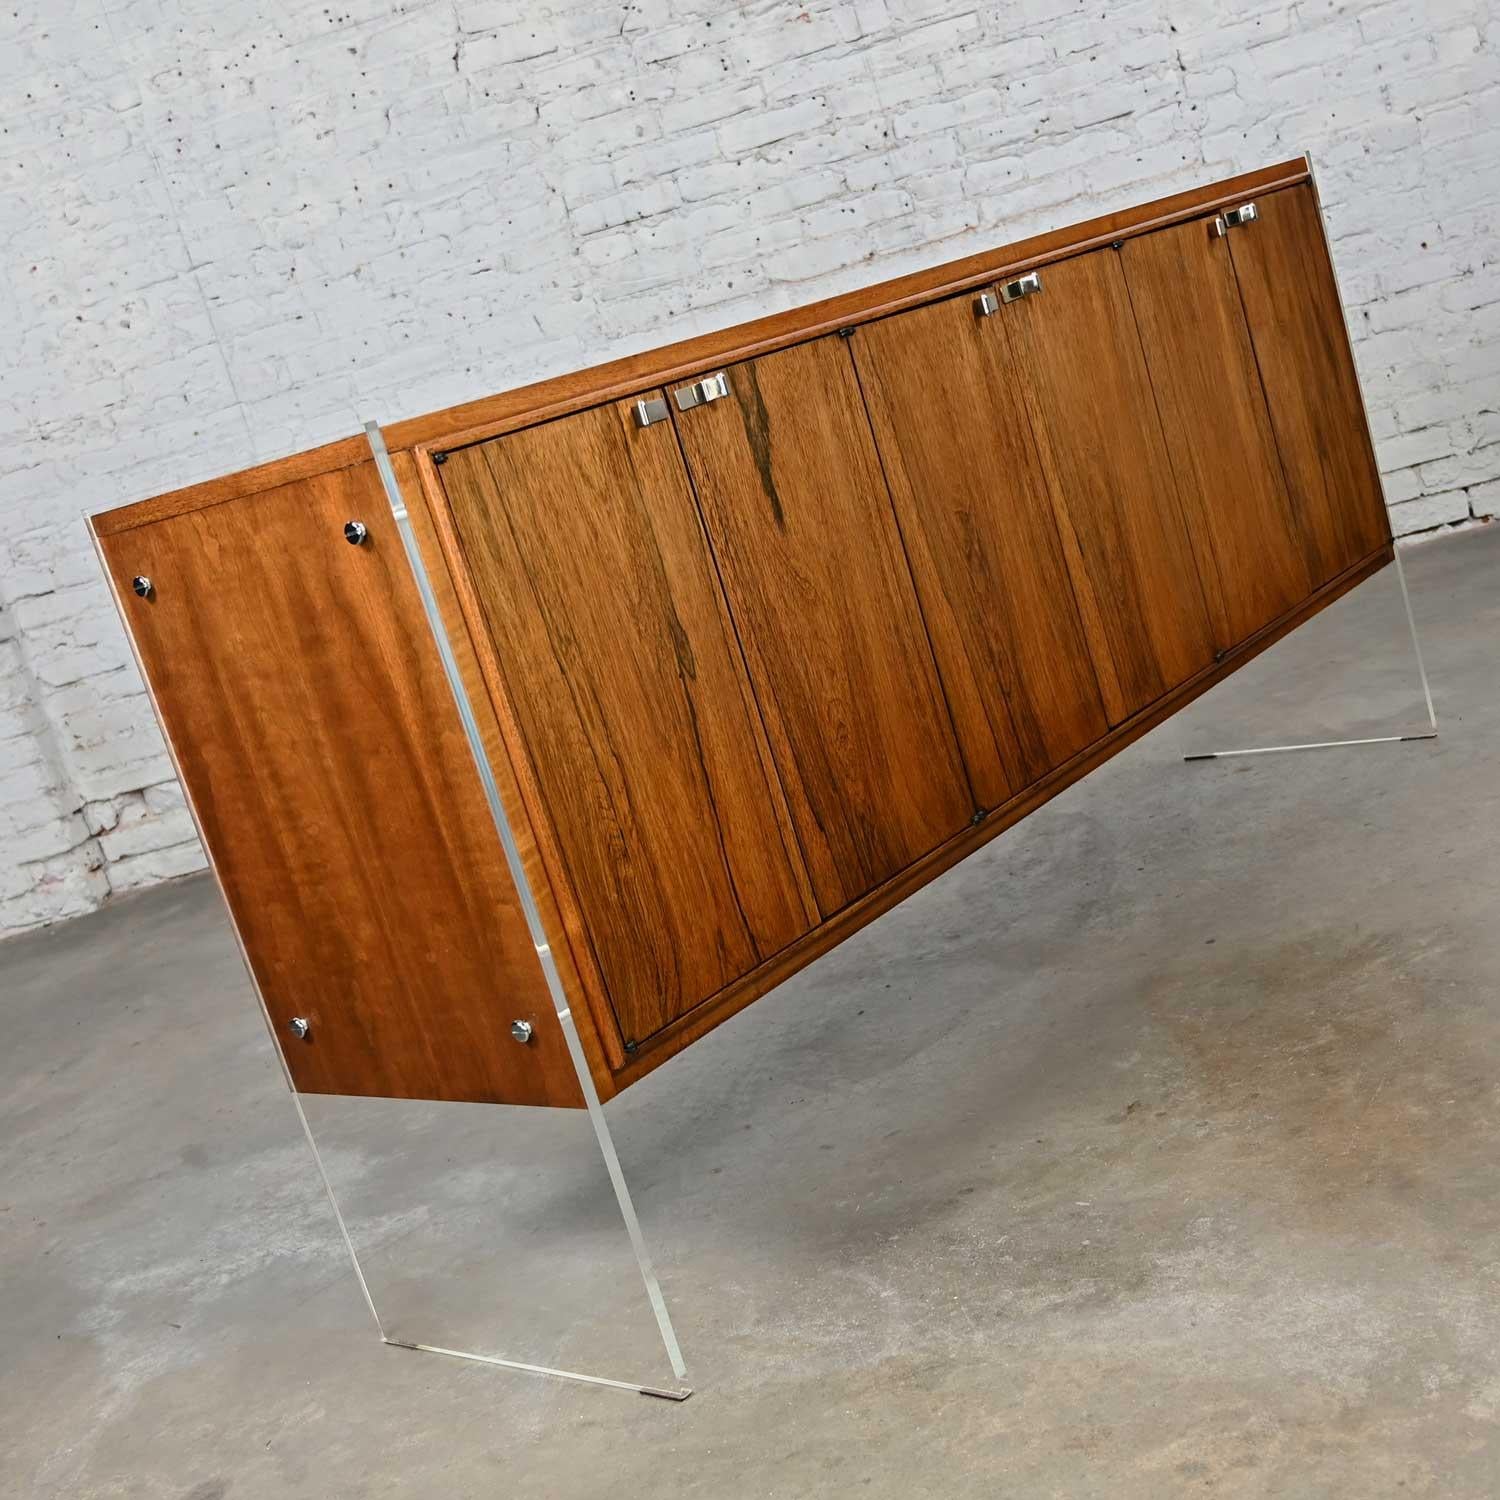 Fabulous vintage Mid-Century Modern to modern Rosewood buffet or credenza with Lucite legs & chrome accents attributed to Bernhardt Flair. This piece has been attributed based upon archived research including online sources, vintage documentation